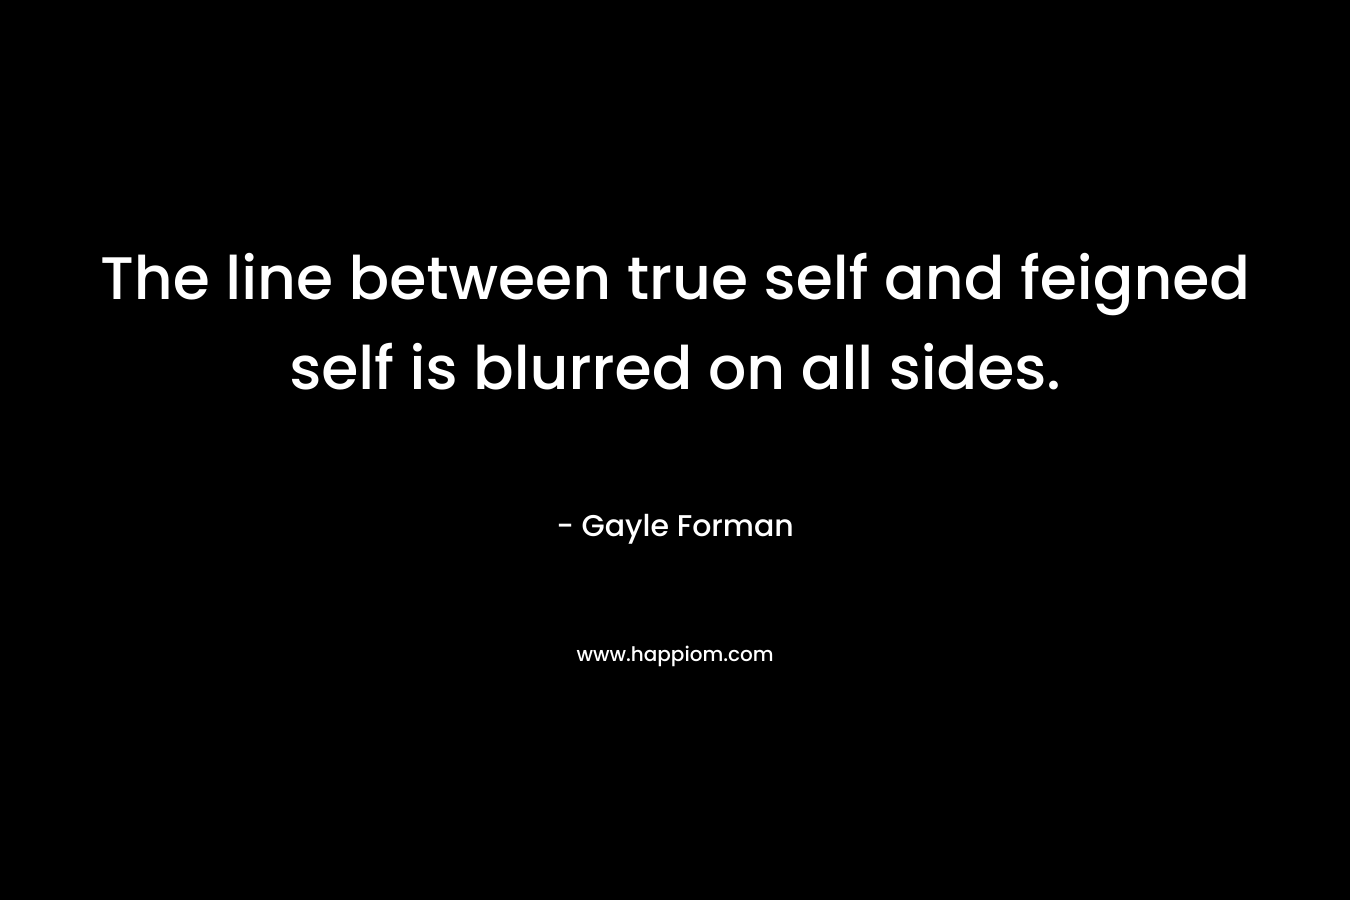 The line between true self and feigned self is blurred on all sides.